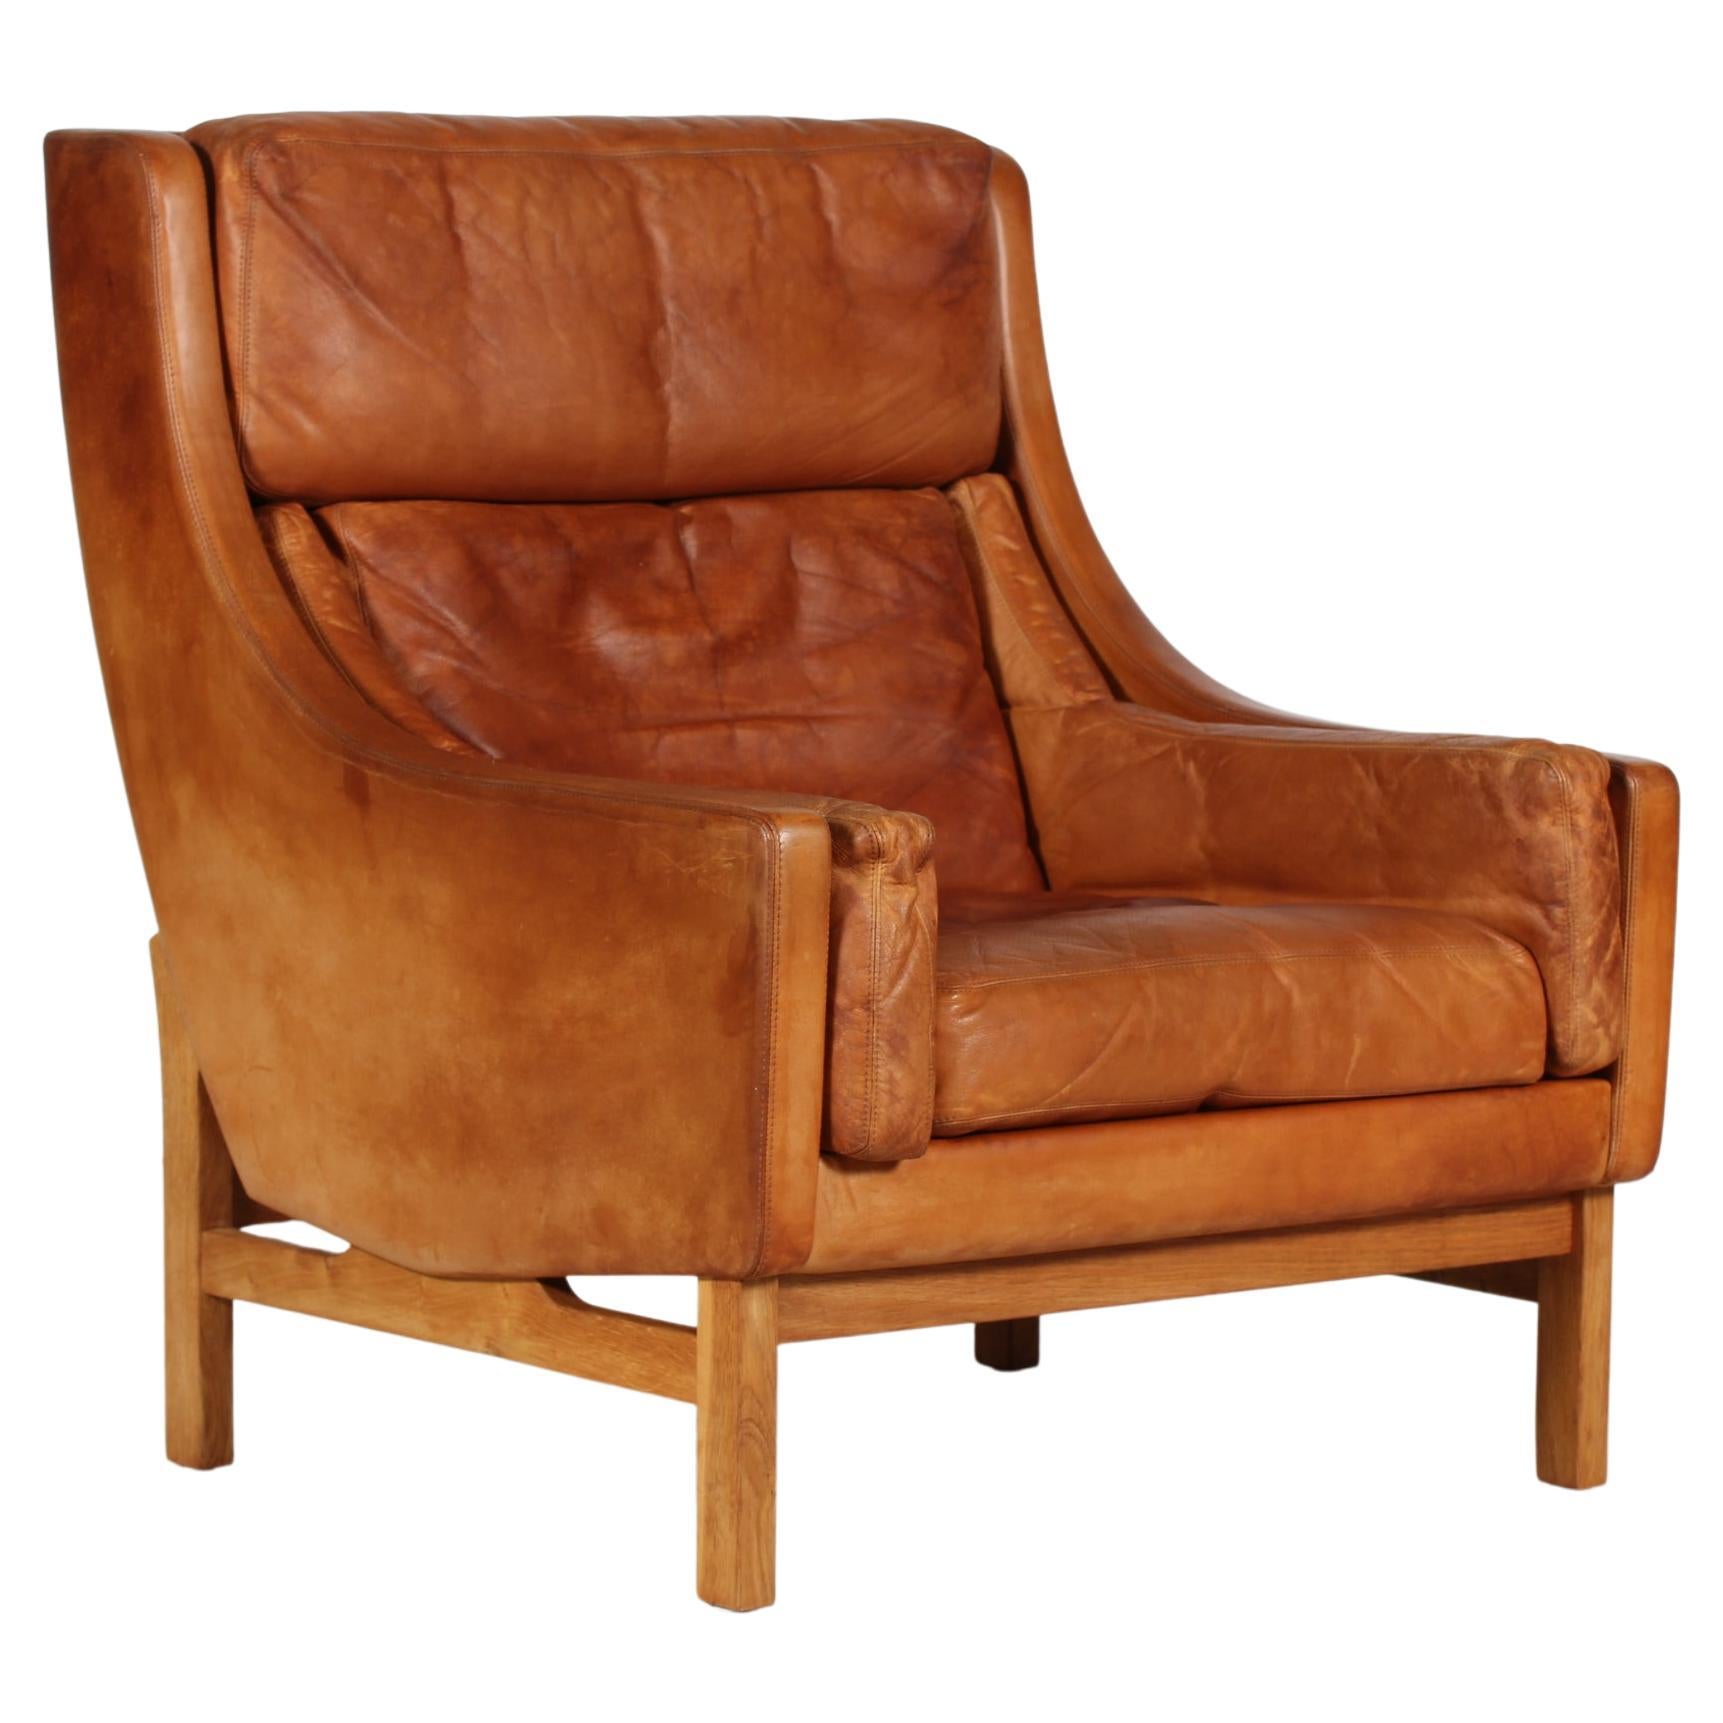 Erik Jørgensen Lounge Chair with Cognac Colored Patinated Leather Denmark 1970s